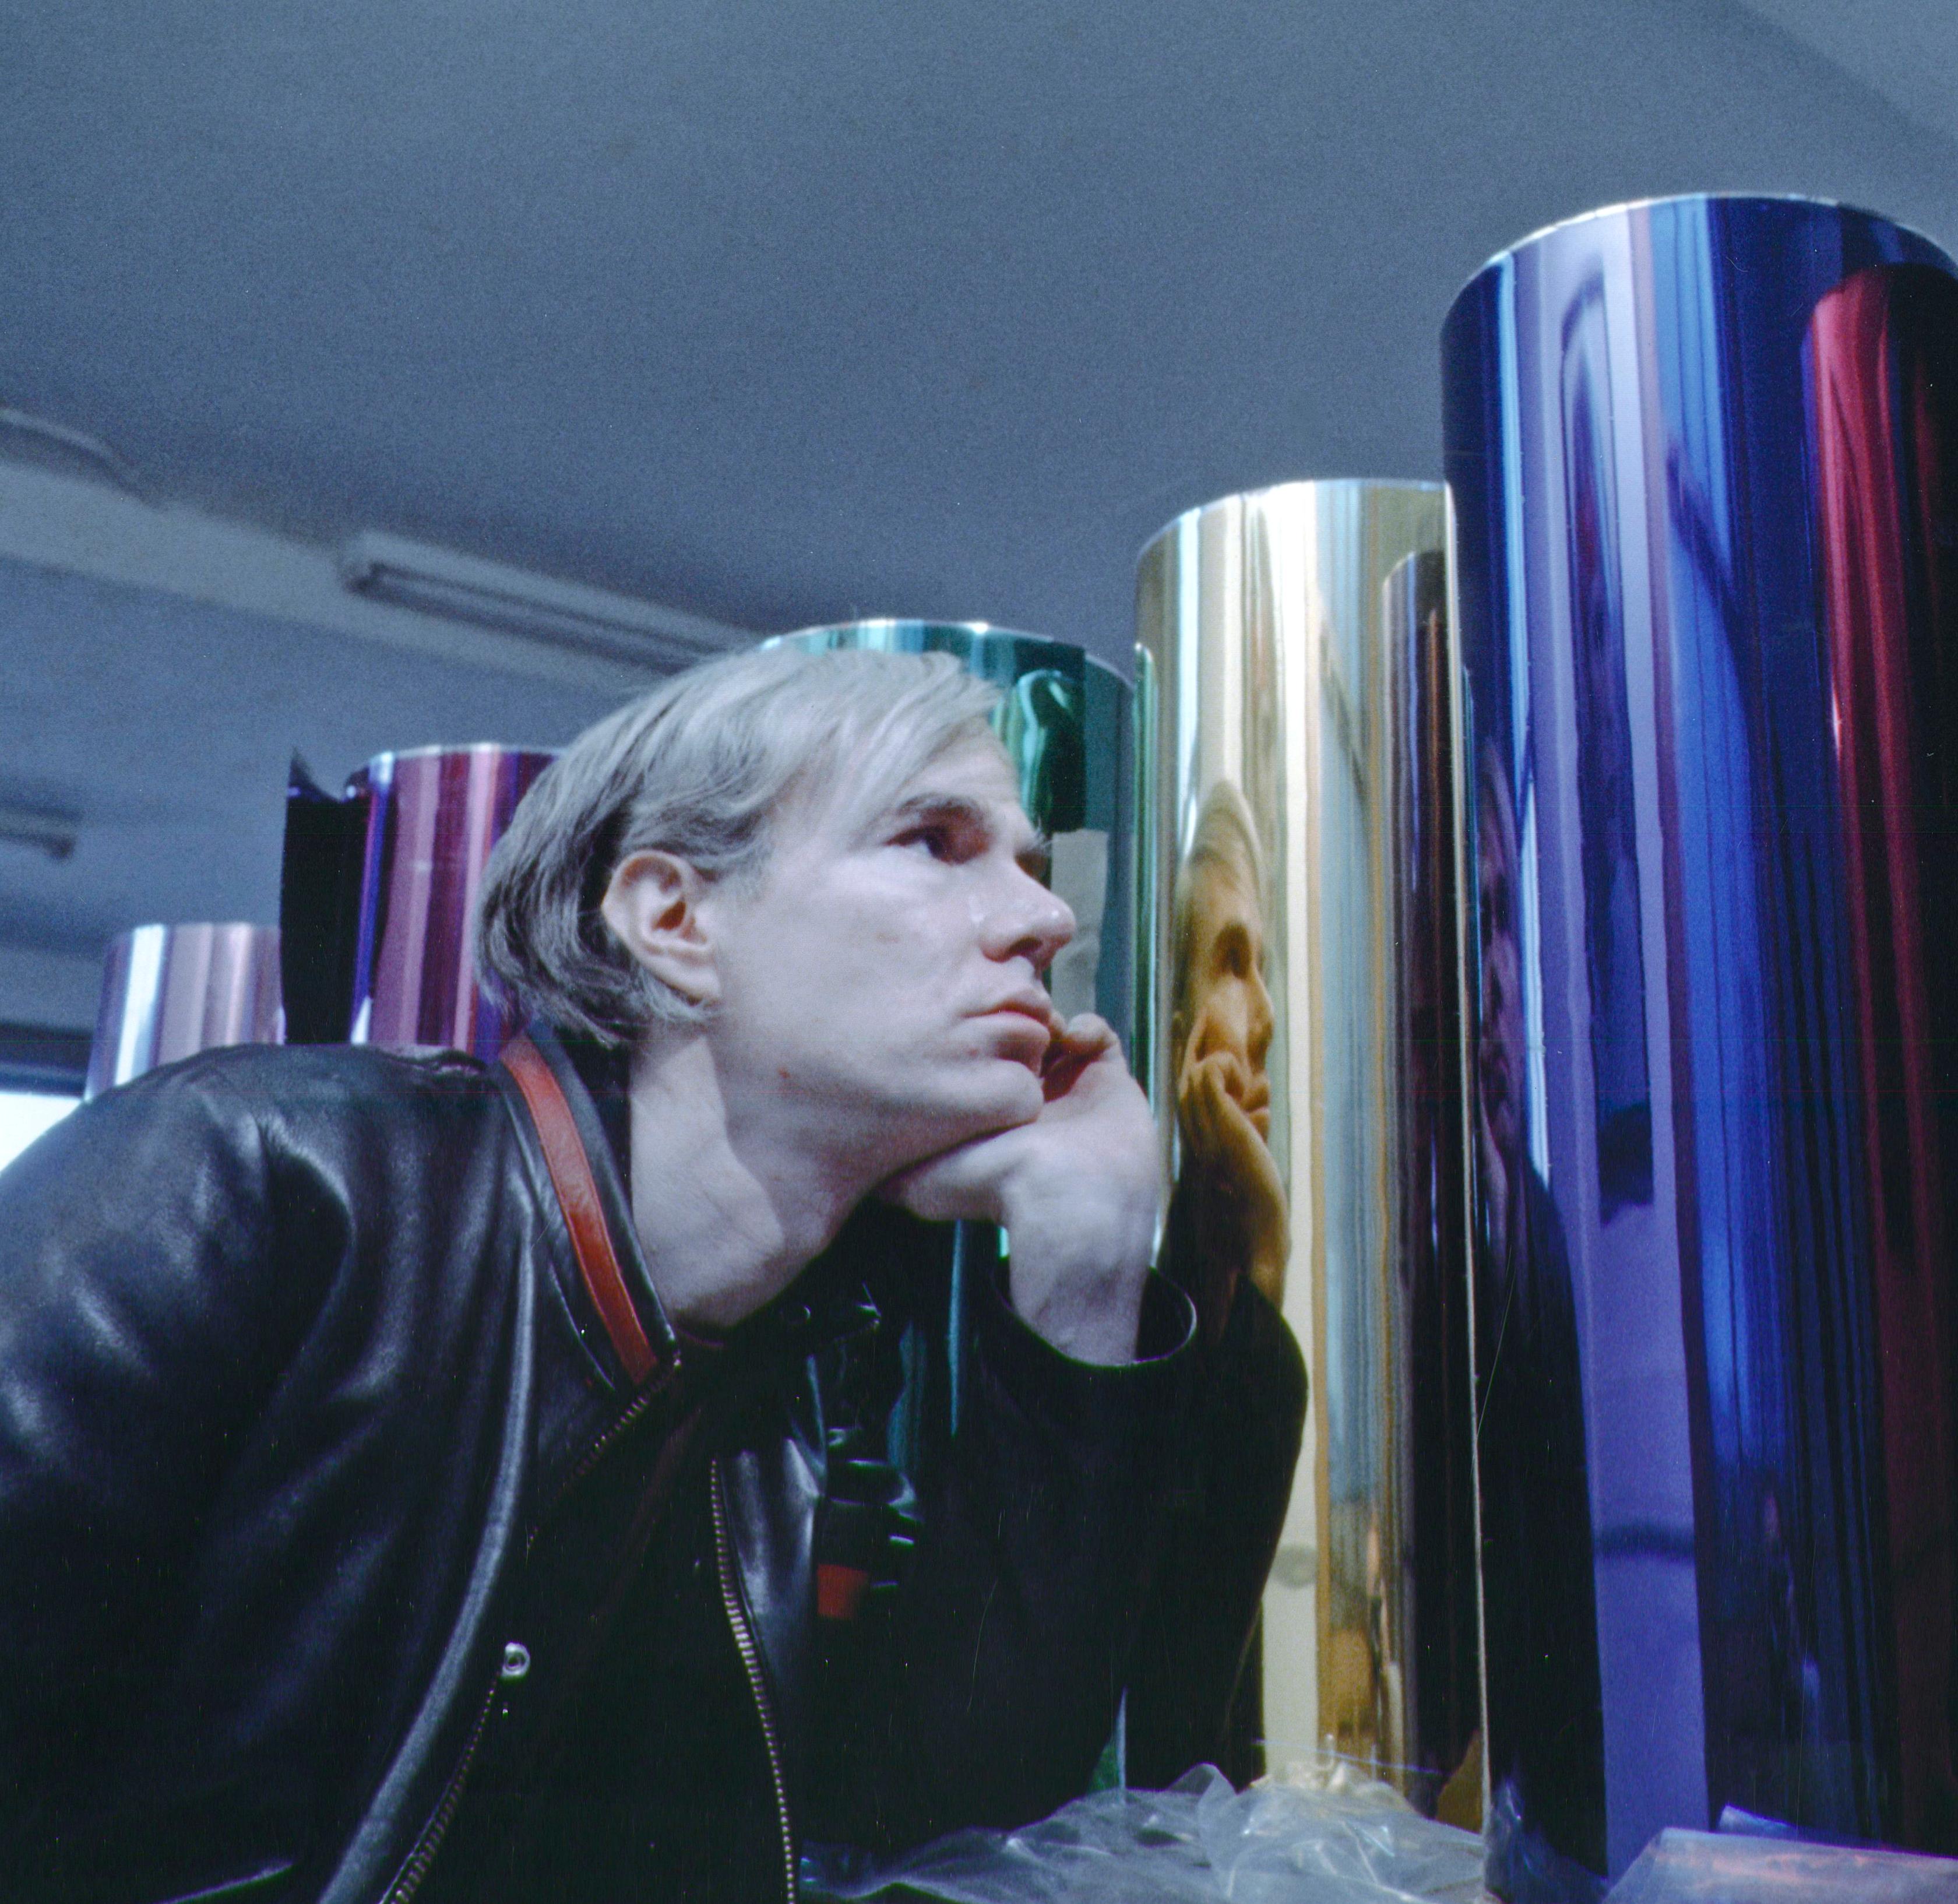 Artist Andy Warhol in his Union Square Factory in New York City - Photograph by Jack Mitchell